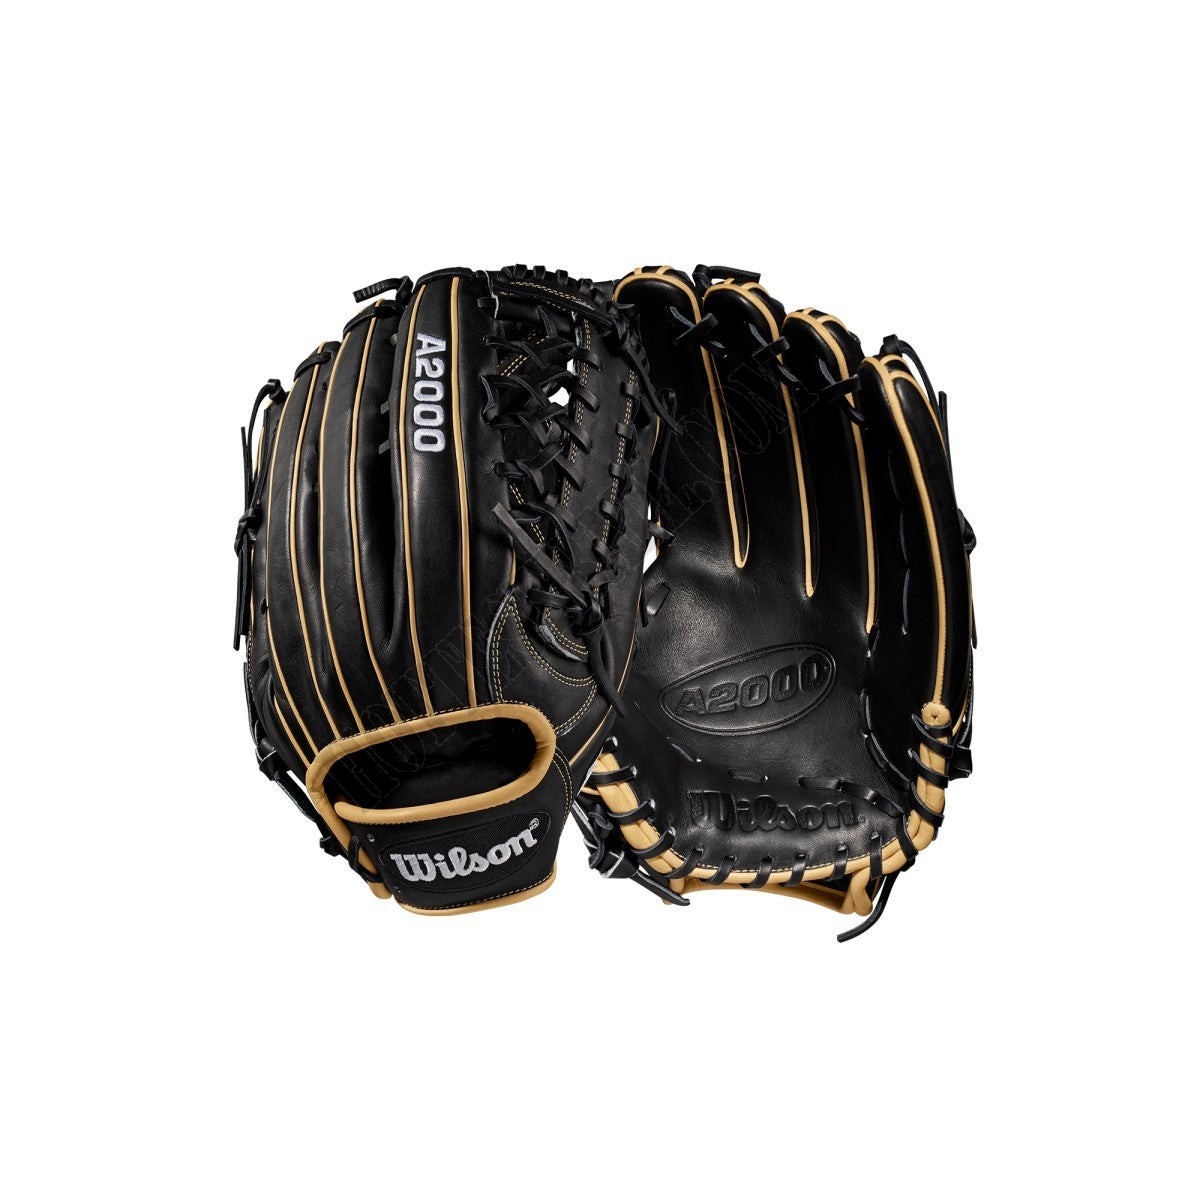 2019 A2000 KP92 12.5" Outfield Baseball Glove ● Wilson Promotions - 2019 A2000 KP92 12.5" Outfield Baseball Glove ● Wilson Promotions